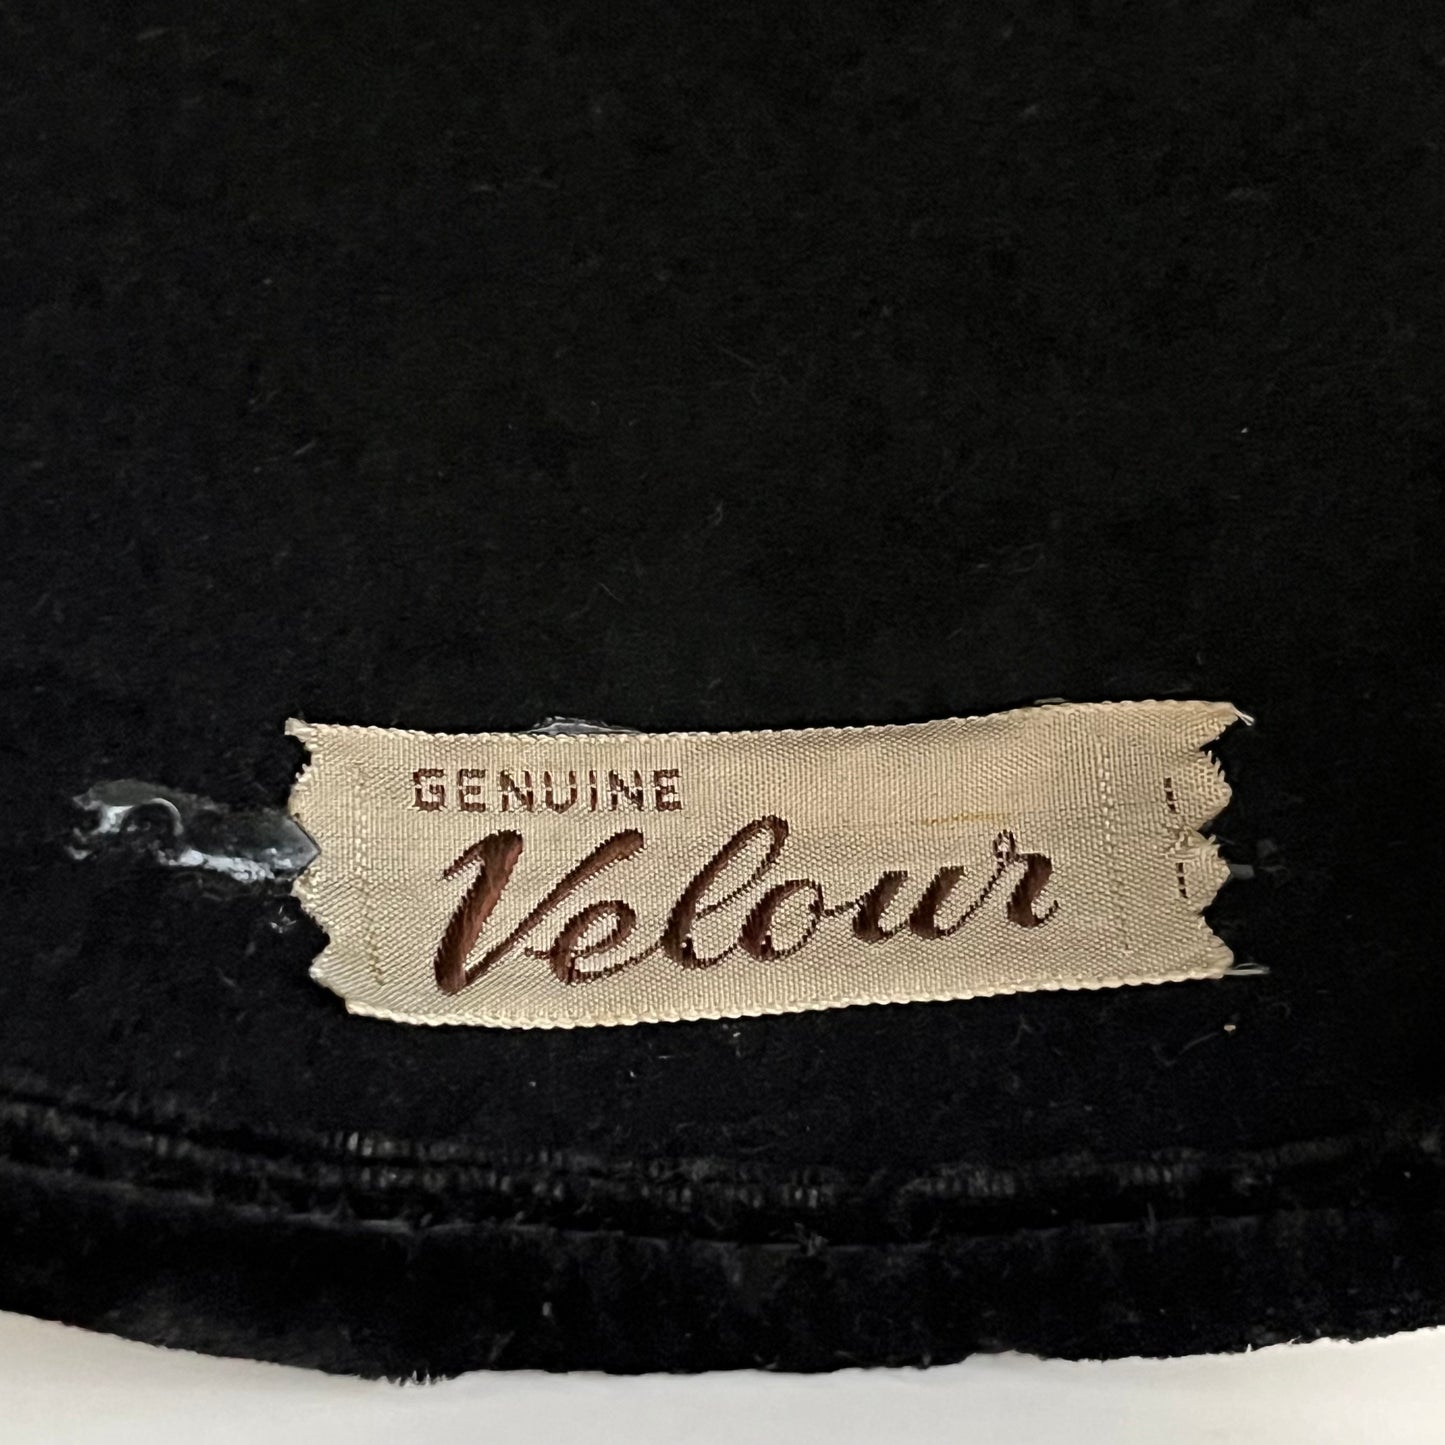 Late 40s/ Early 50s Velour Cocktail Hat